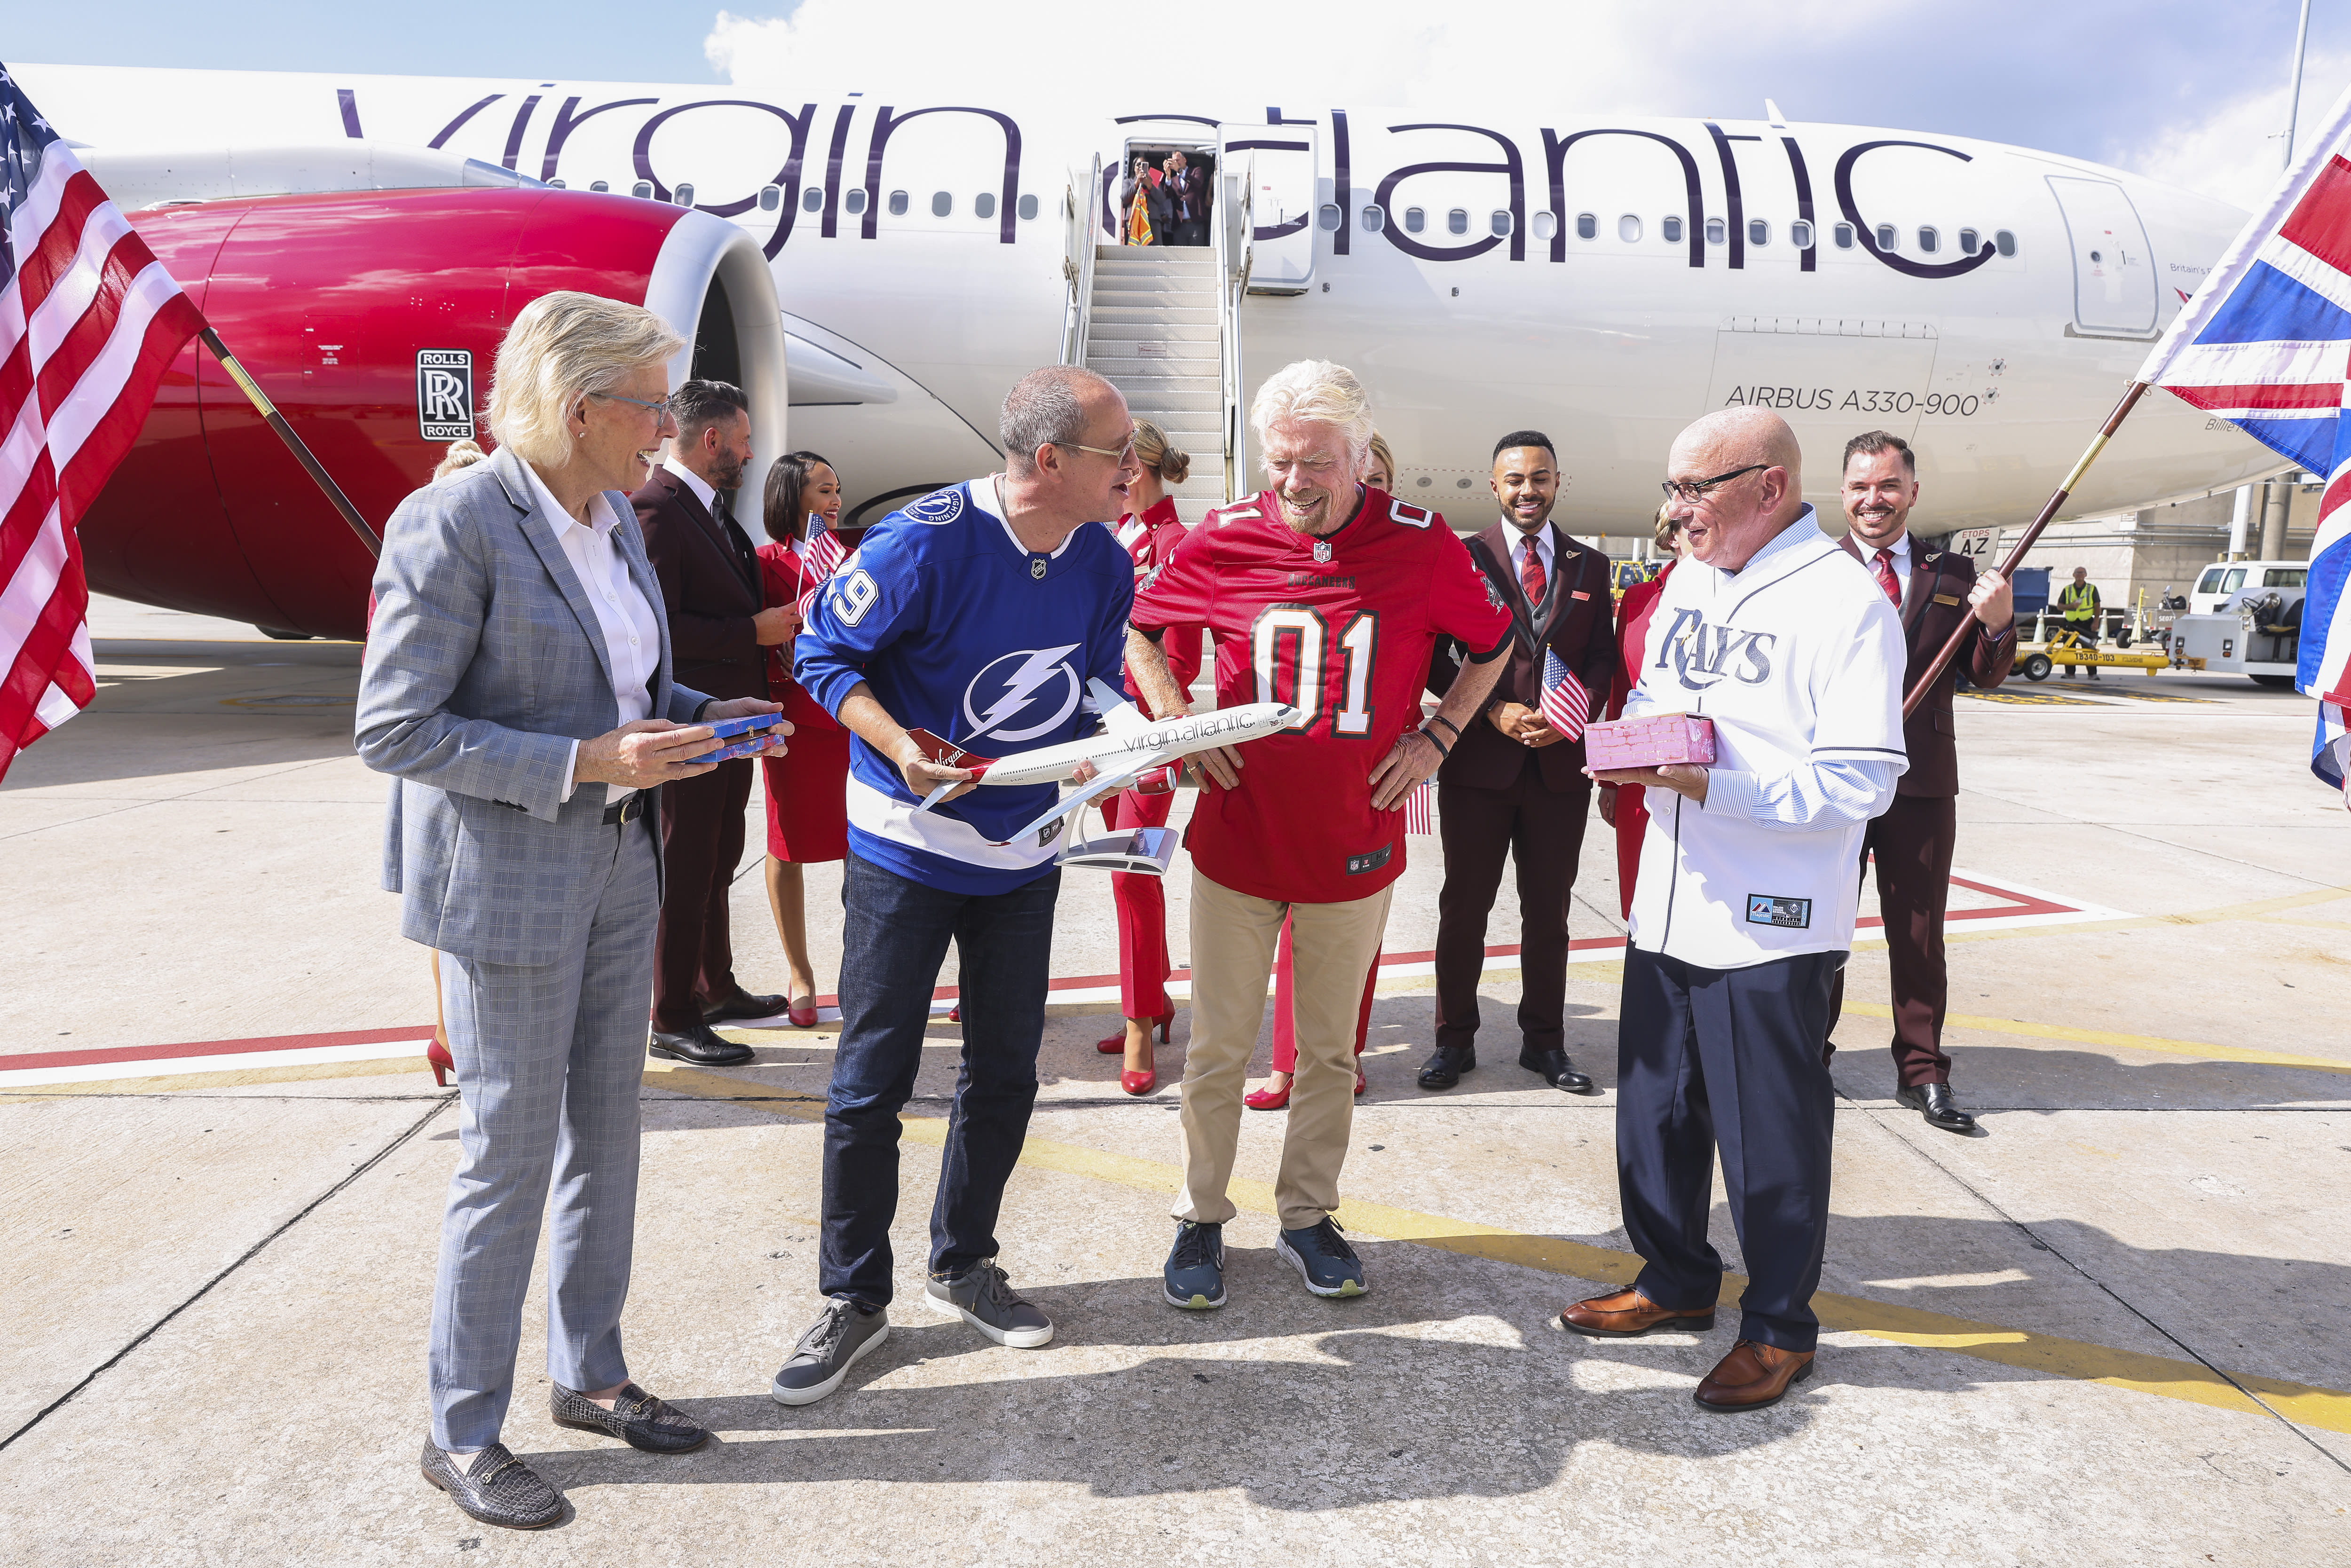 Richard Branson and Shai Weiss with Virgin Atlantic for the Tampa Inaugural flight